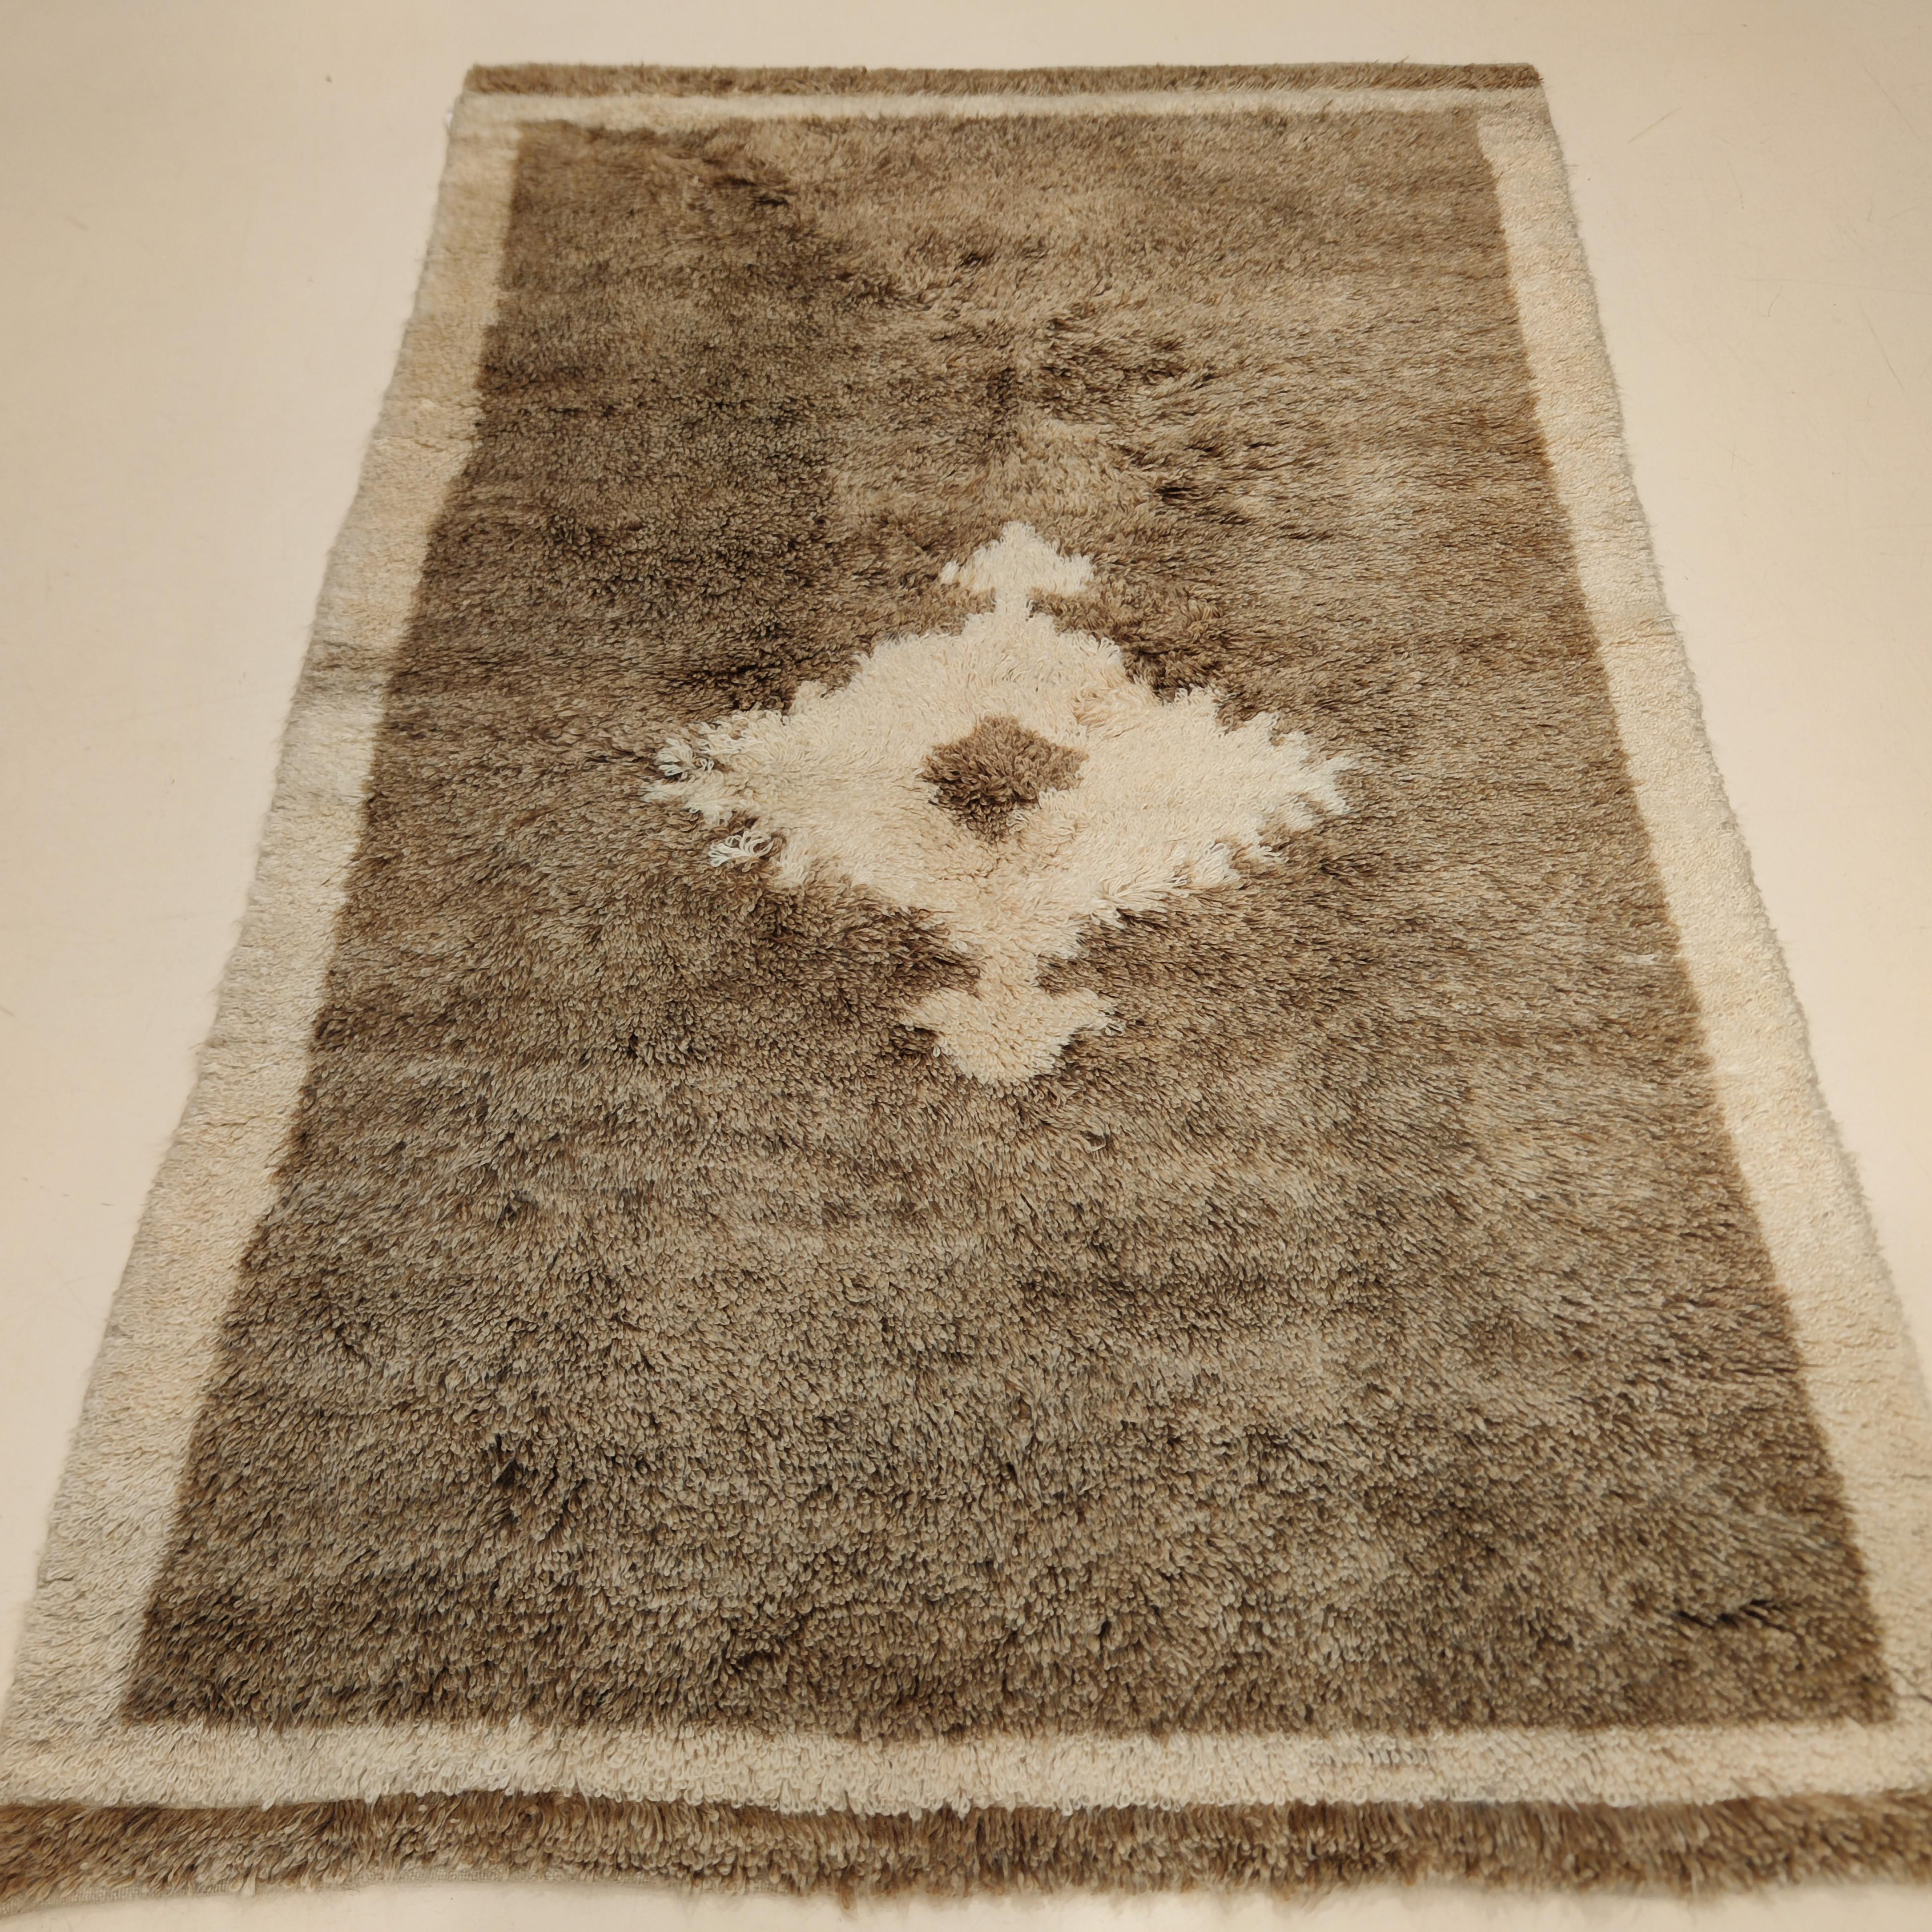 A rare and early Tulu woven using the finest Angora wool, resulting in a finely woven rug with a silky texture and a blanket-like handle. The soft camel field is embellished by a zoomorphic central device similar to some motifs founds in Neolithic